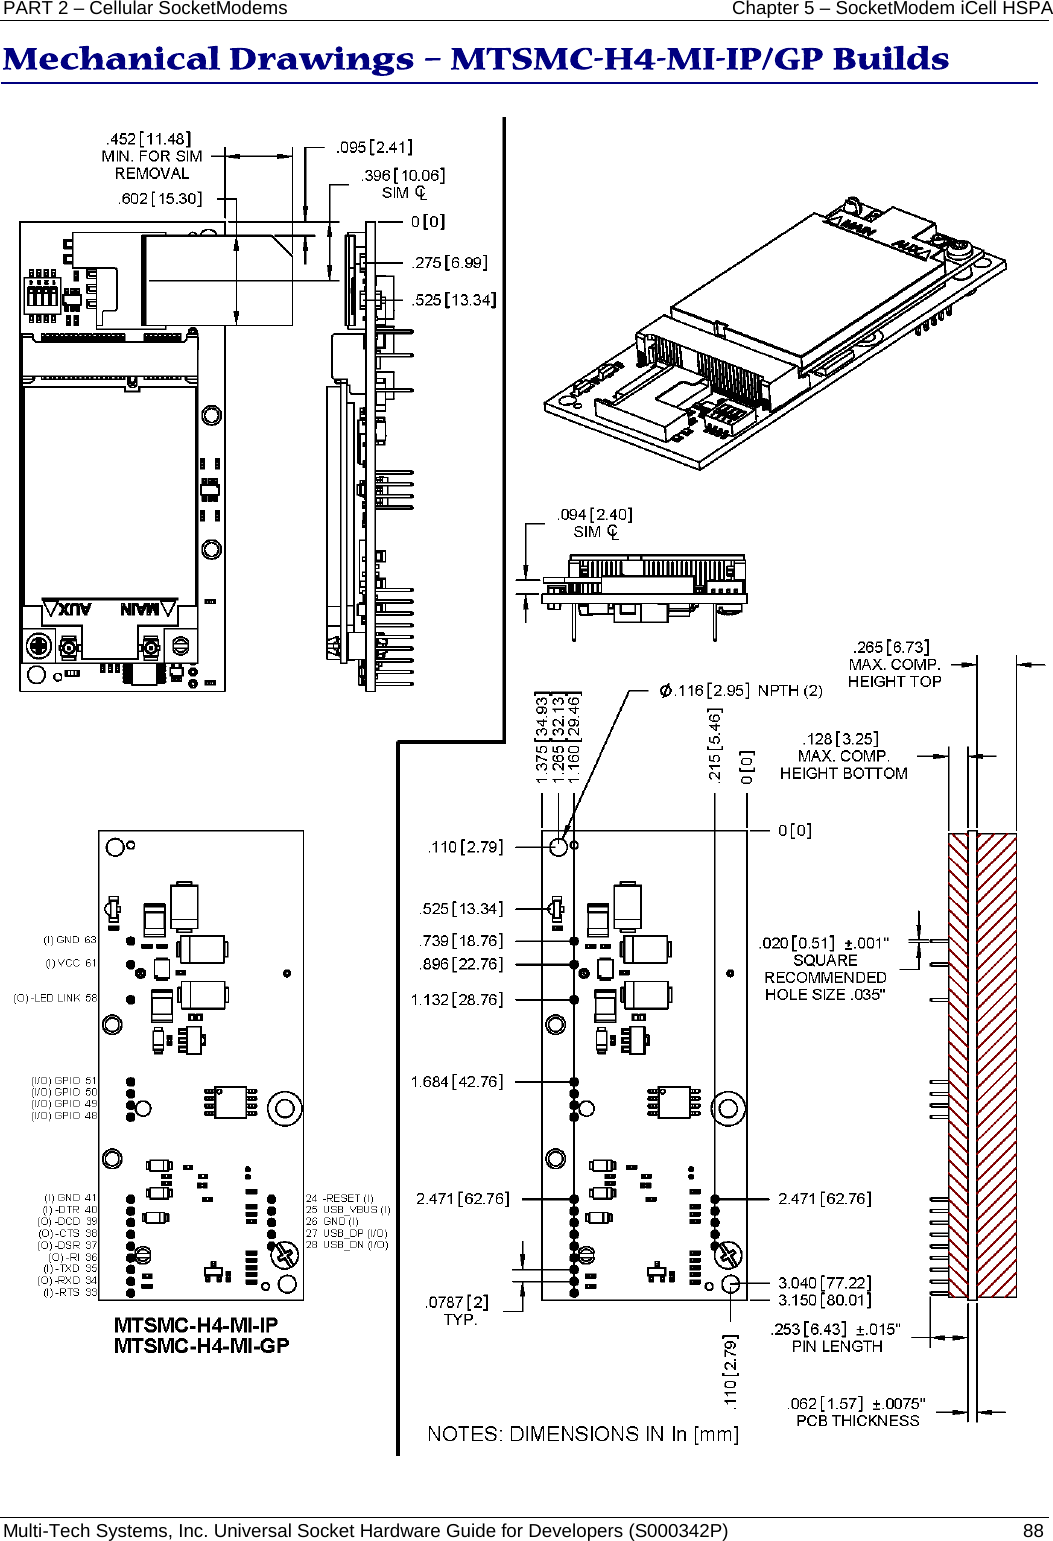 PART 2 – Cellular SocketModems Chapter 5 – SocketModem iCell HSPA Multi-Tech Systems, Inc. Universal Socket Hardware Guide for Developers (S000342P)  88  Mechanical Drawings – MTSMC-H4-MI-IP/GP Builds    